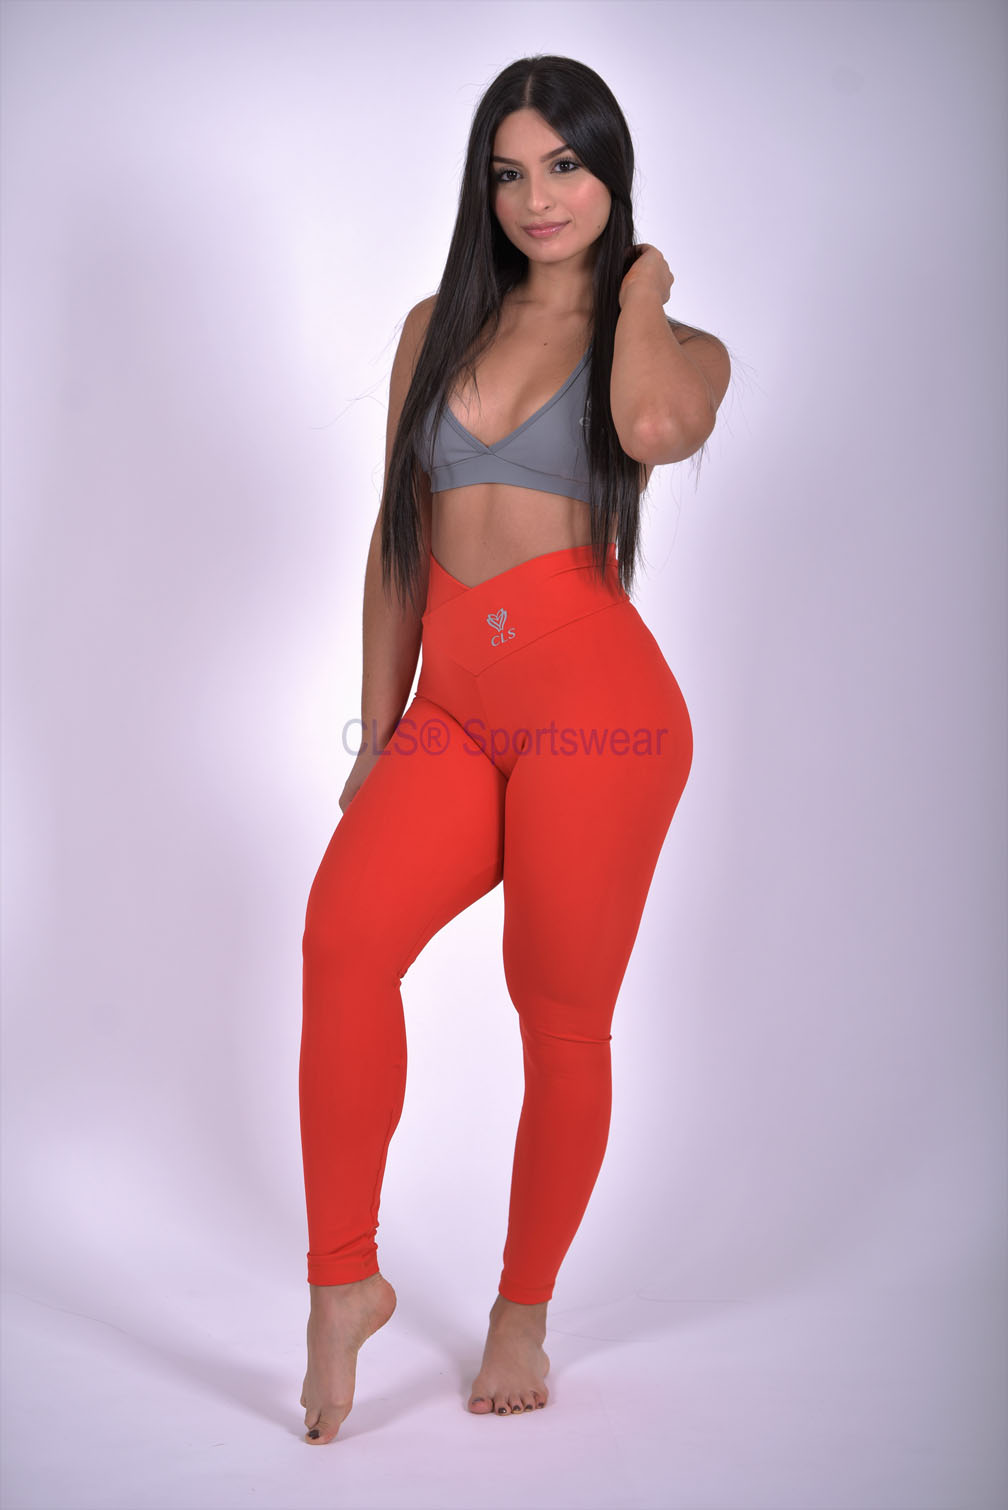 CLS Sportswear - These leggings ship in two business days! NC